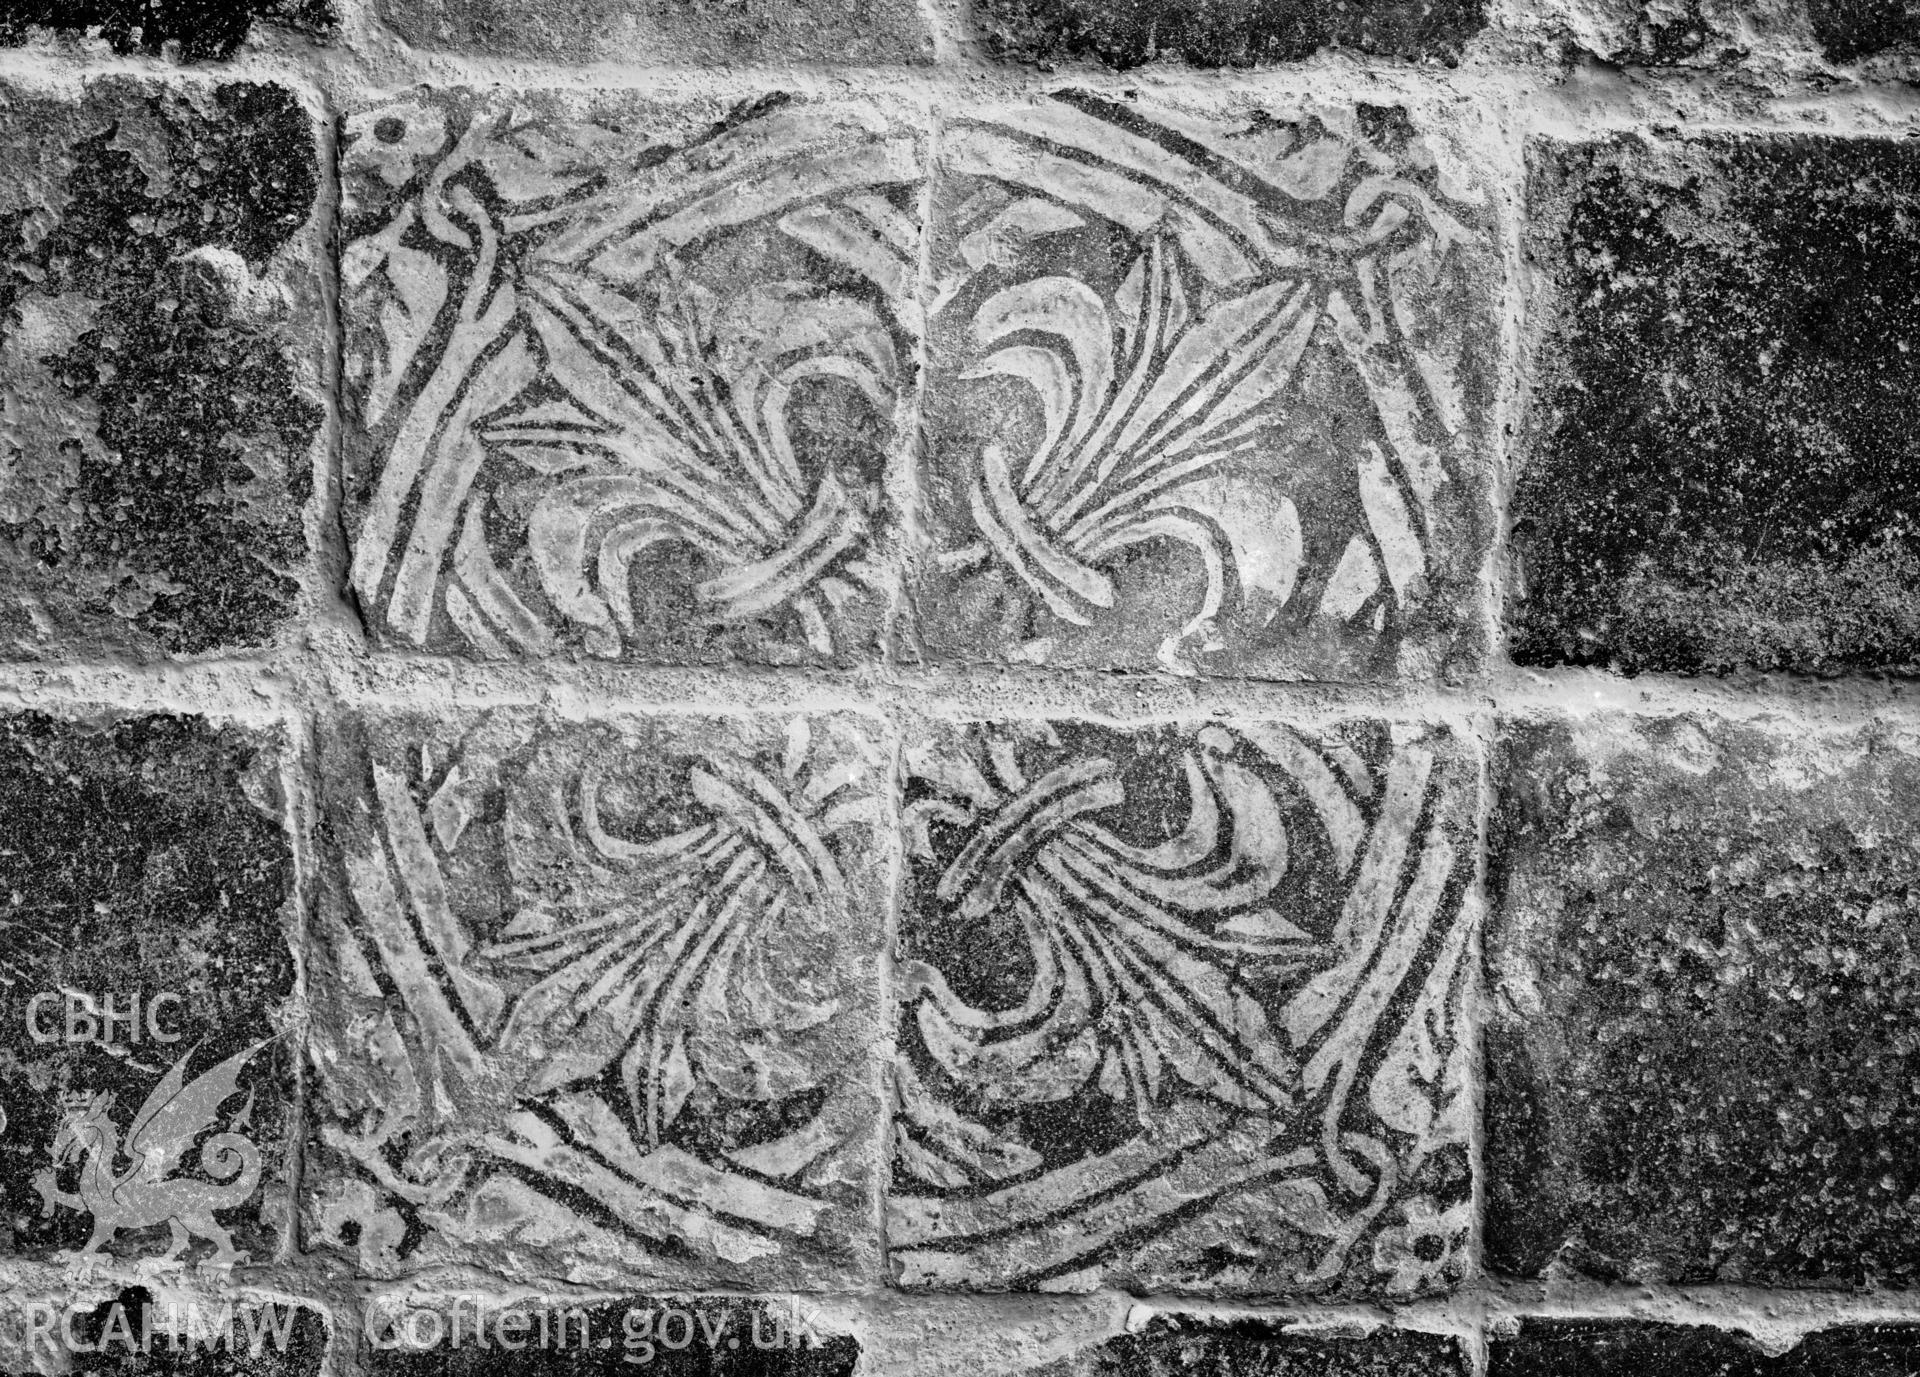 Interior view of St Davids Cathedral showing floor tile.